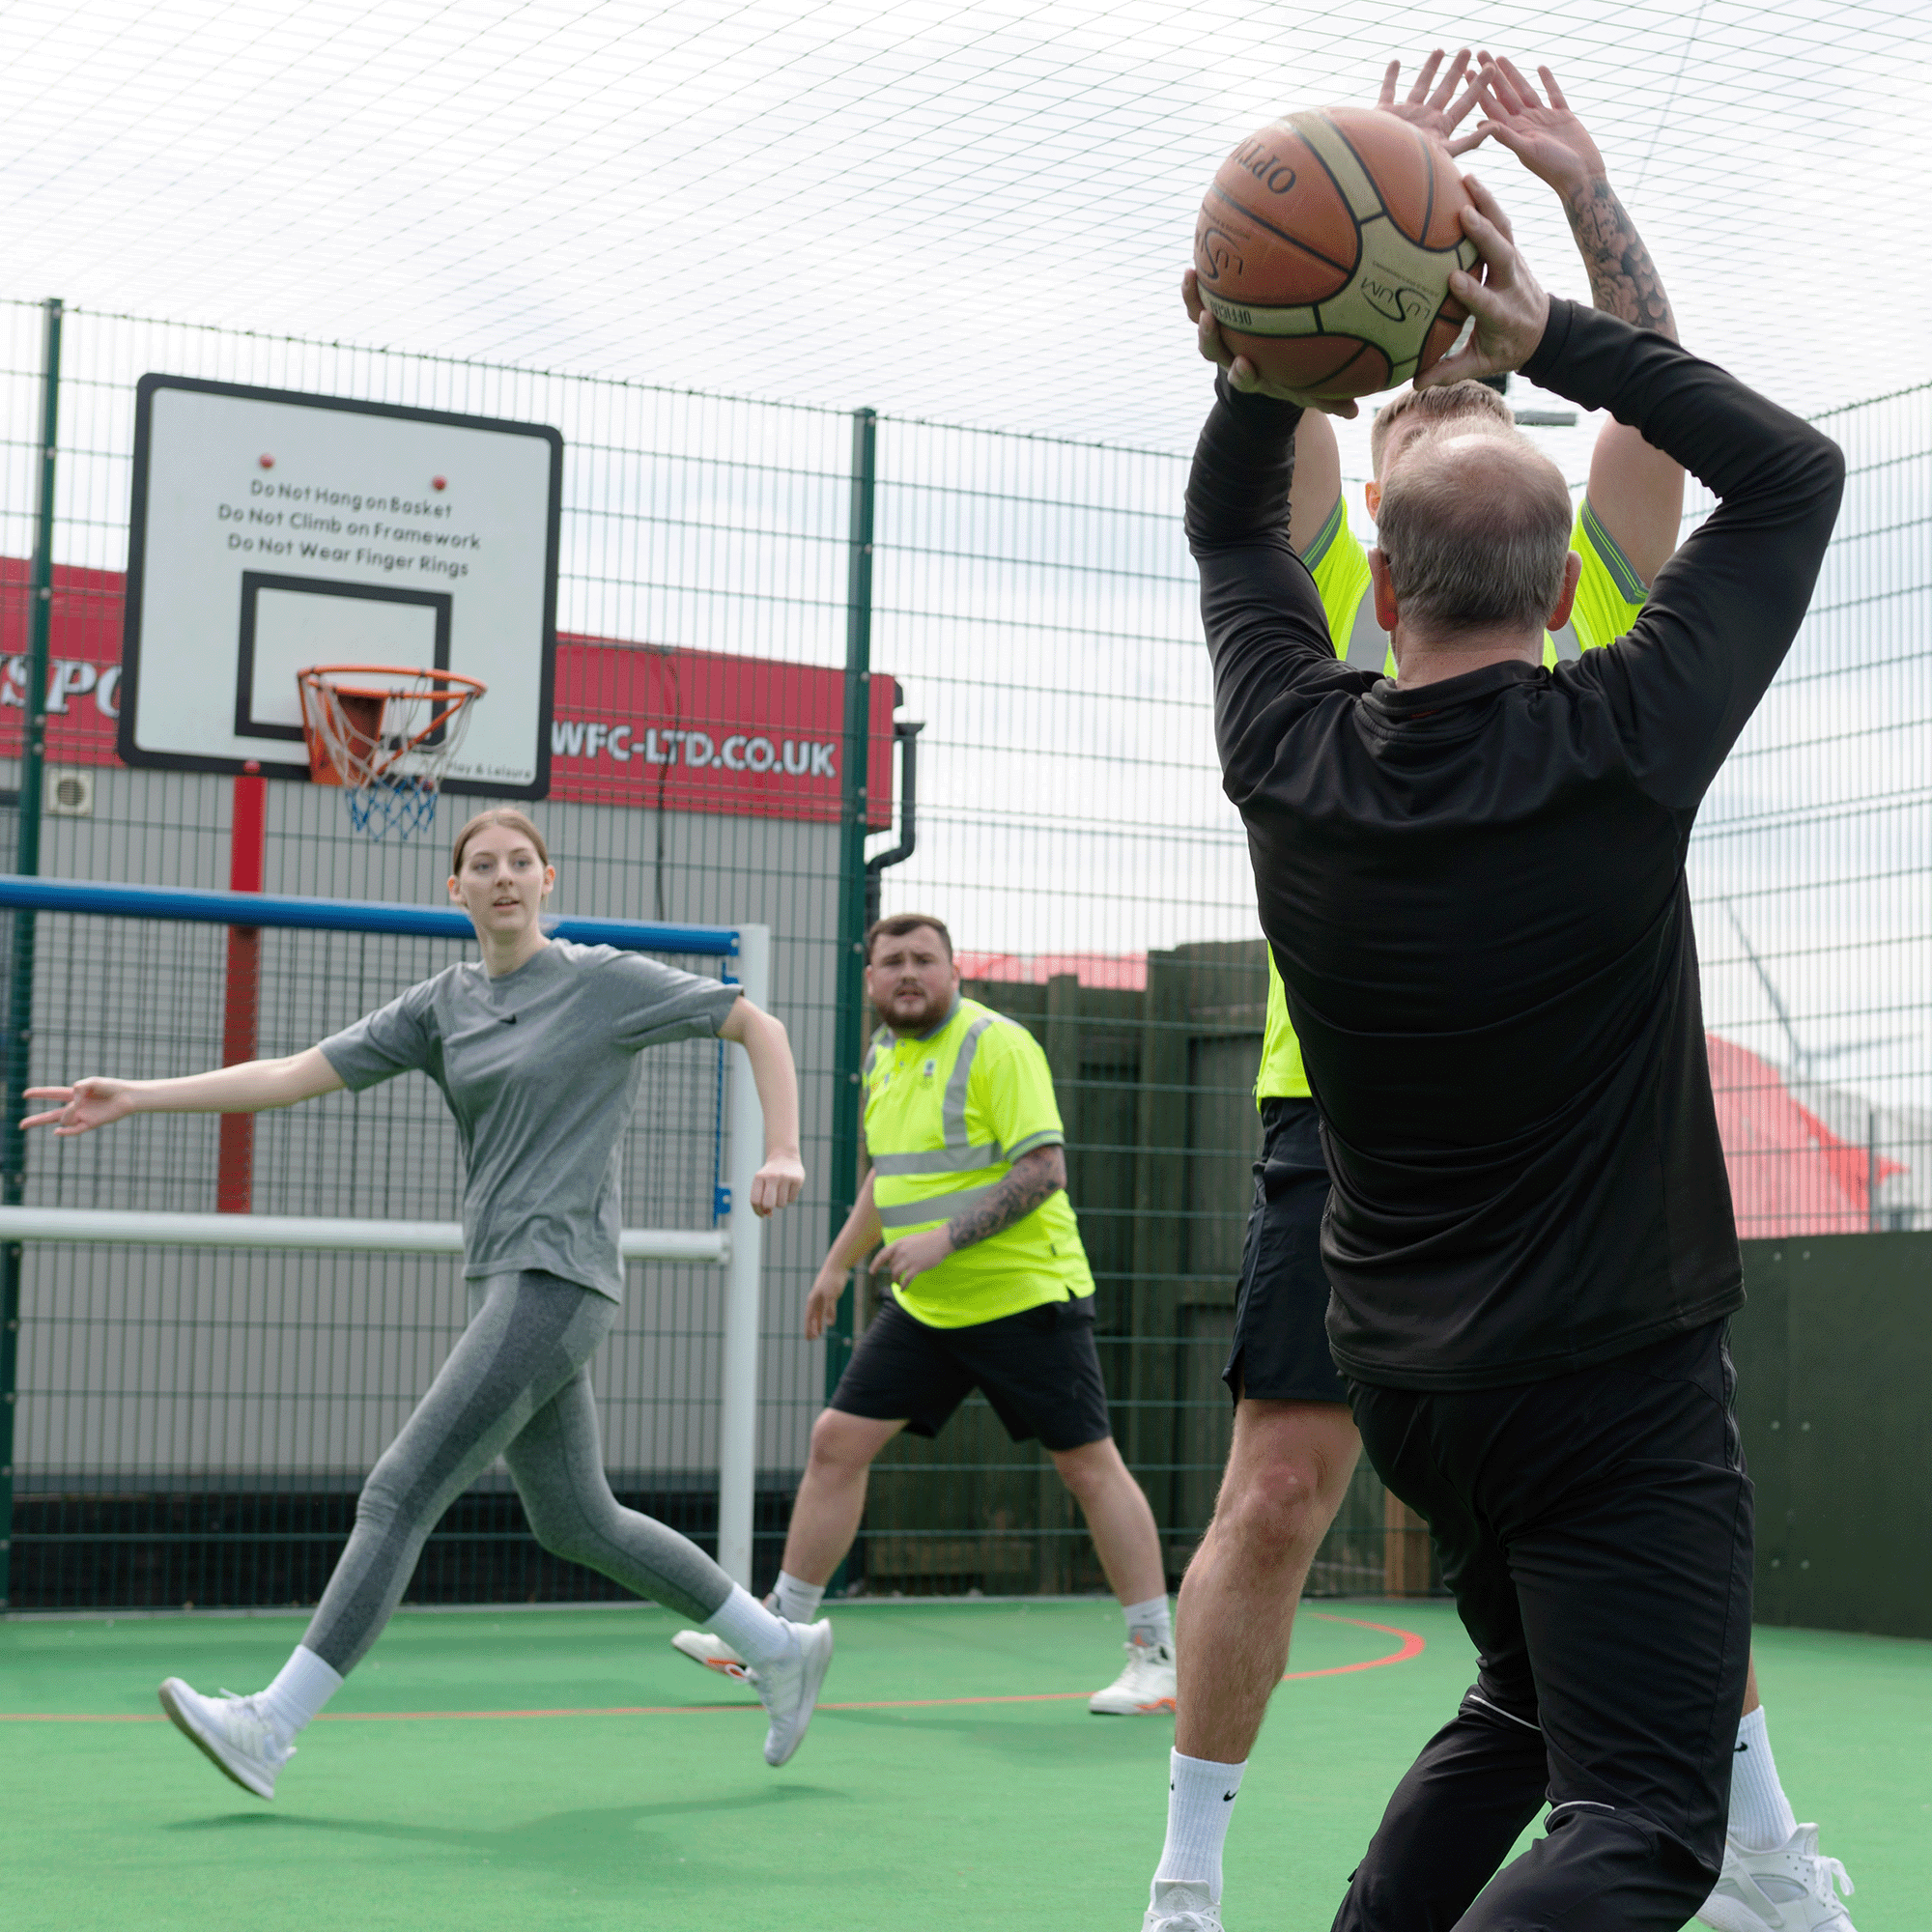 Tilbury Seafarers Centre basketball court back in action 